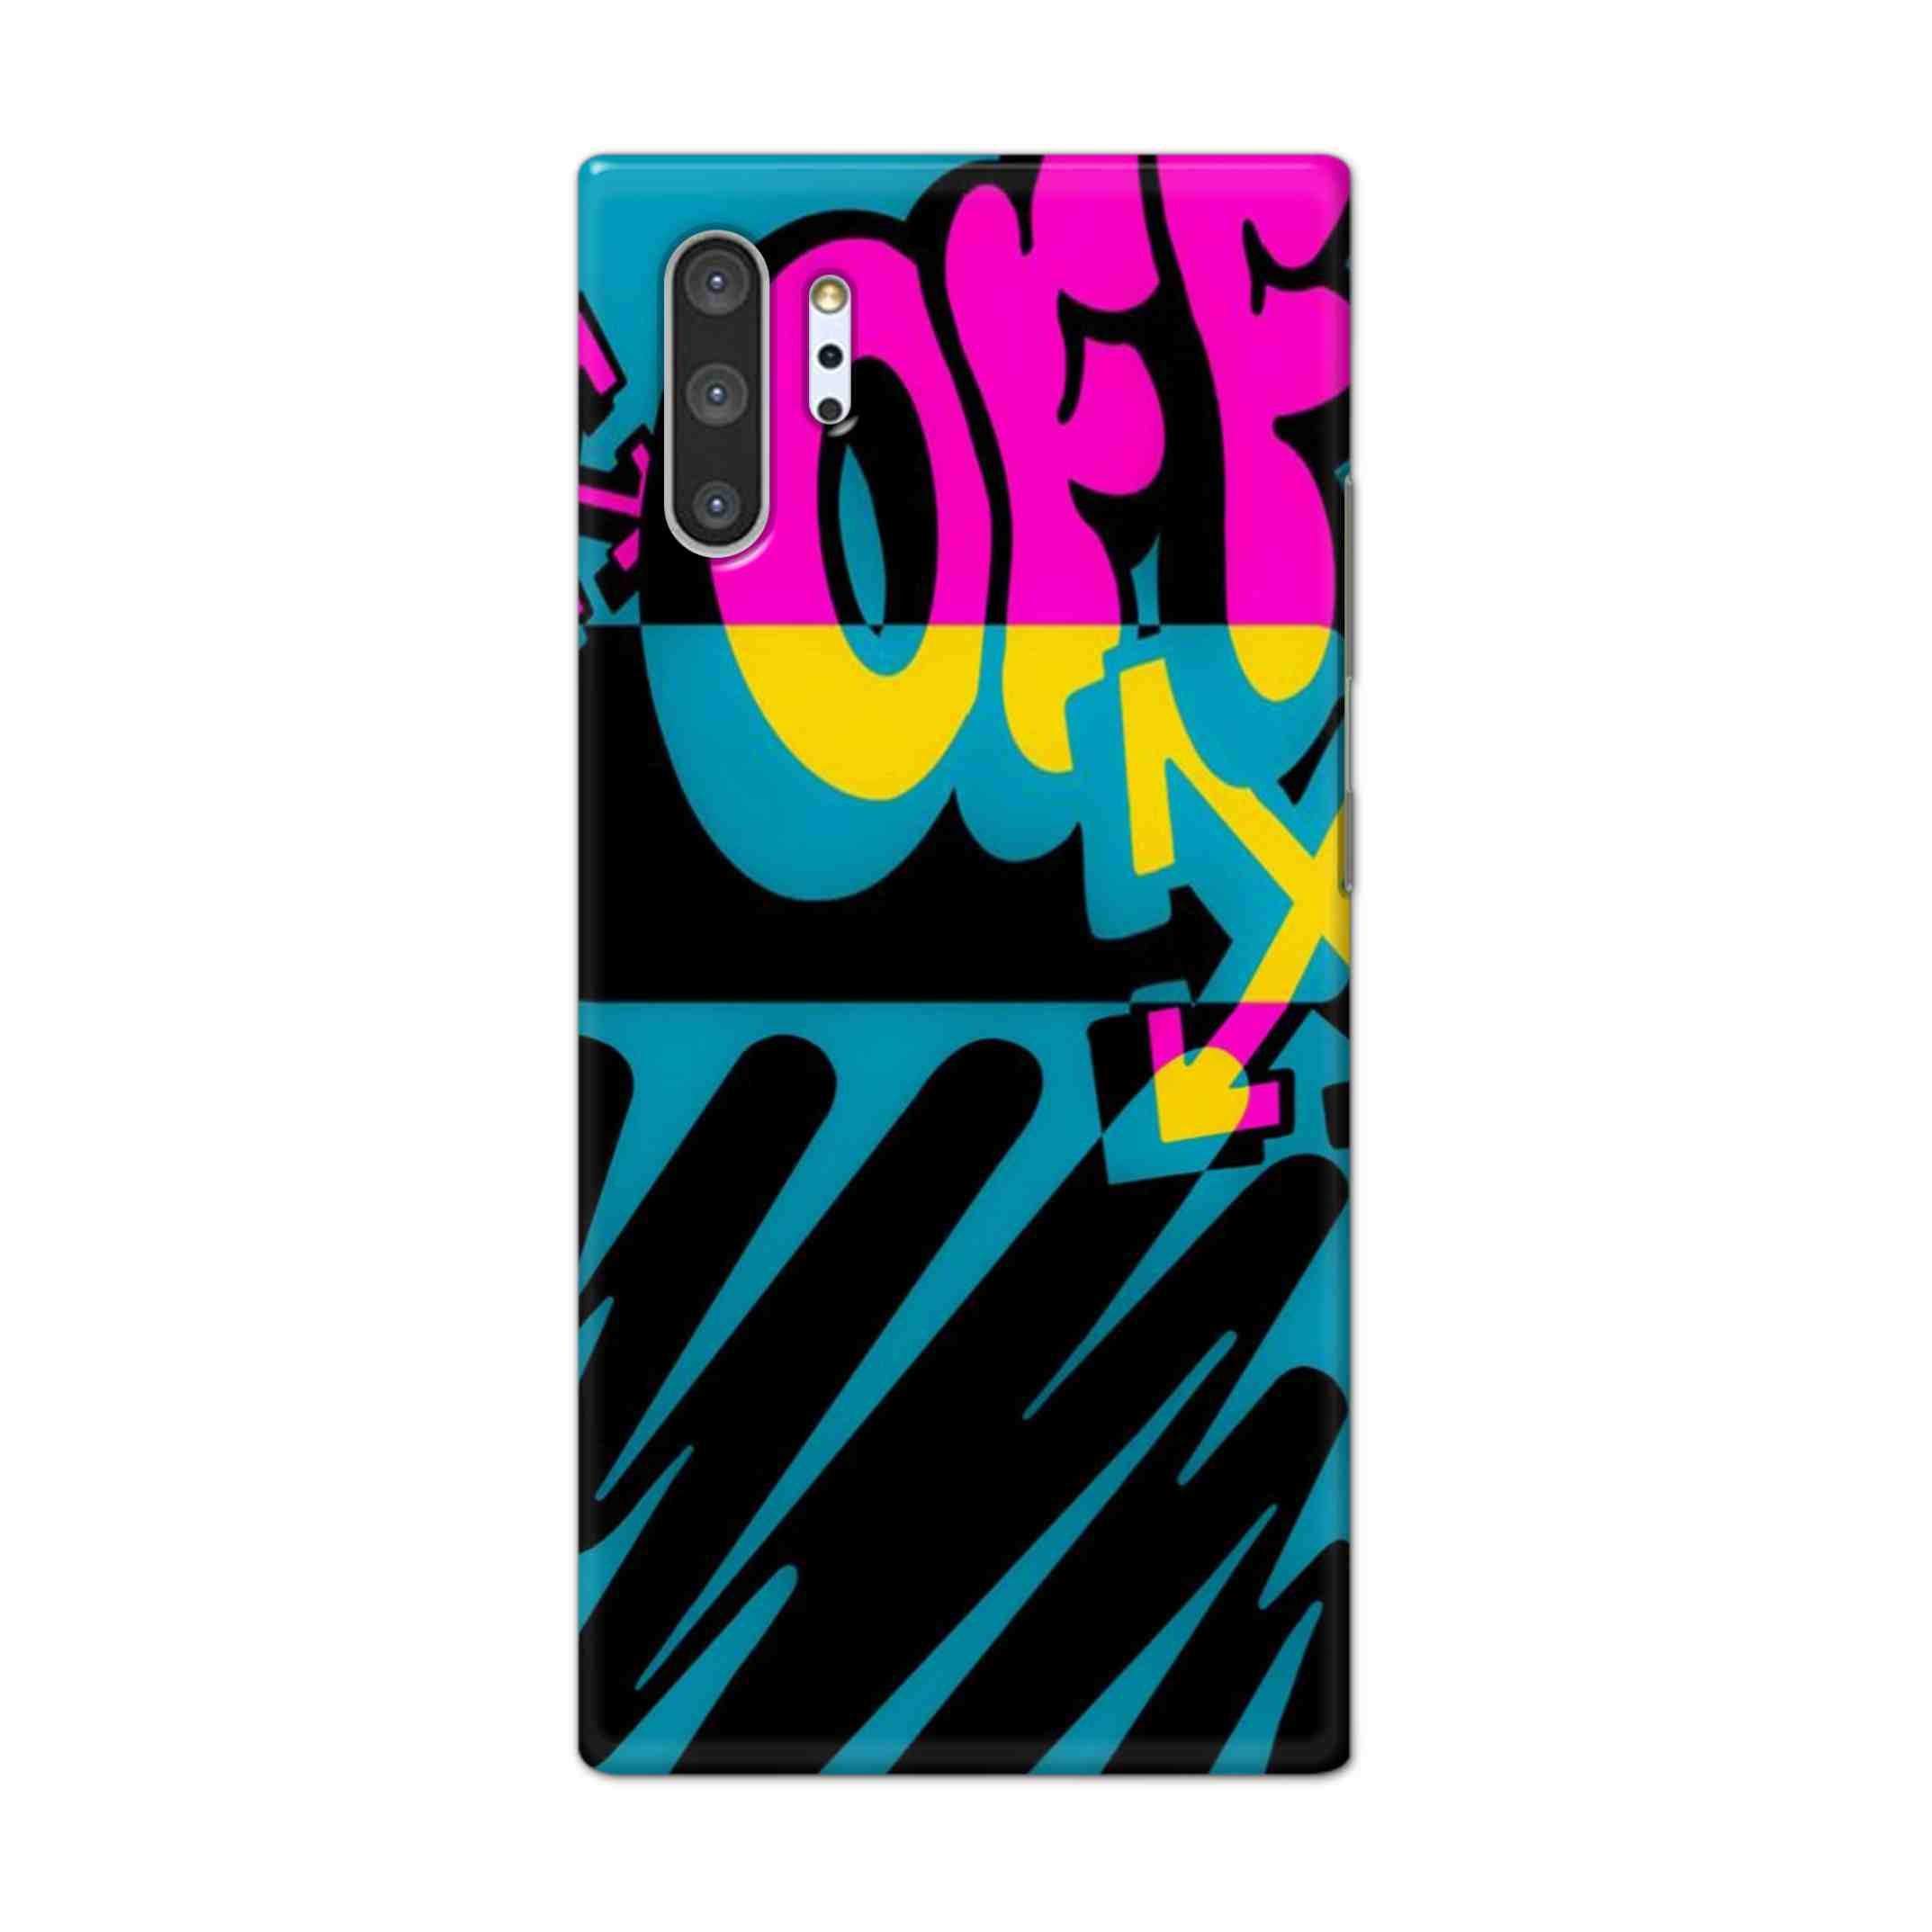 Buy Off Hard Back Mobile Phone Case Cover For Samsung Galaxy Note 10 Pro Online